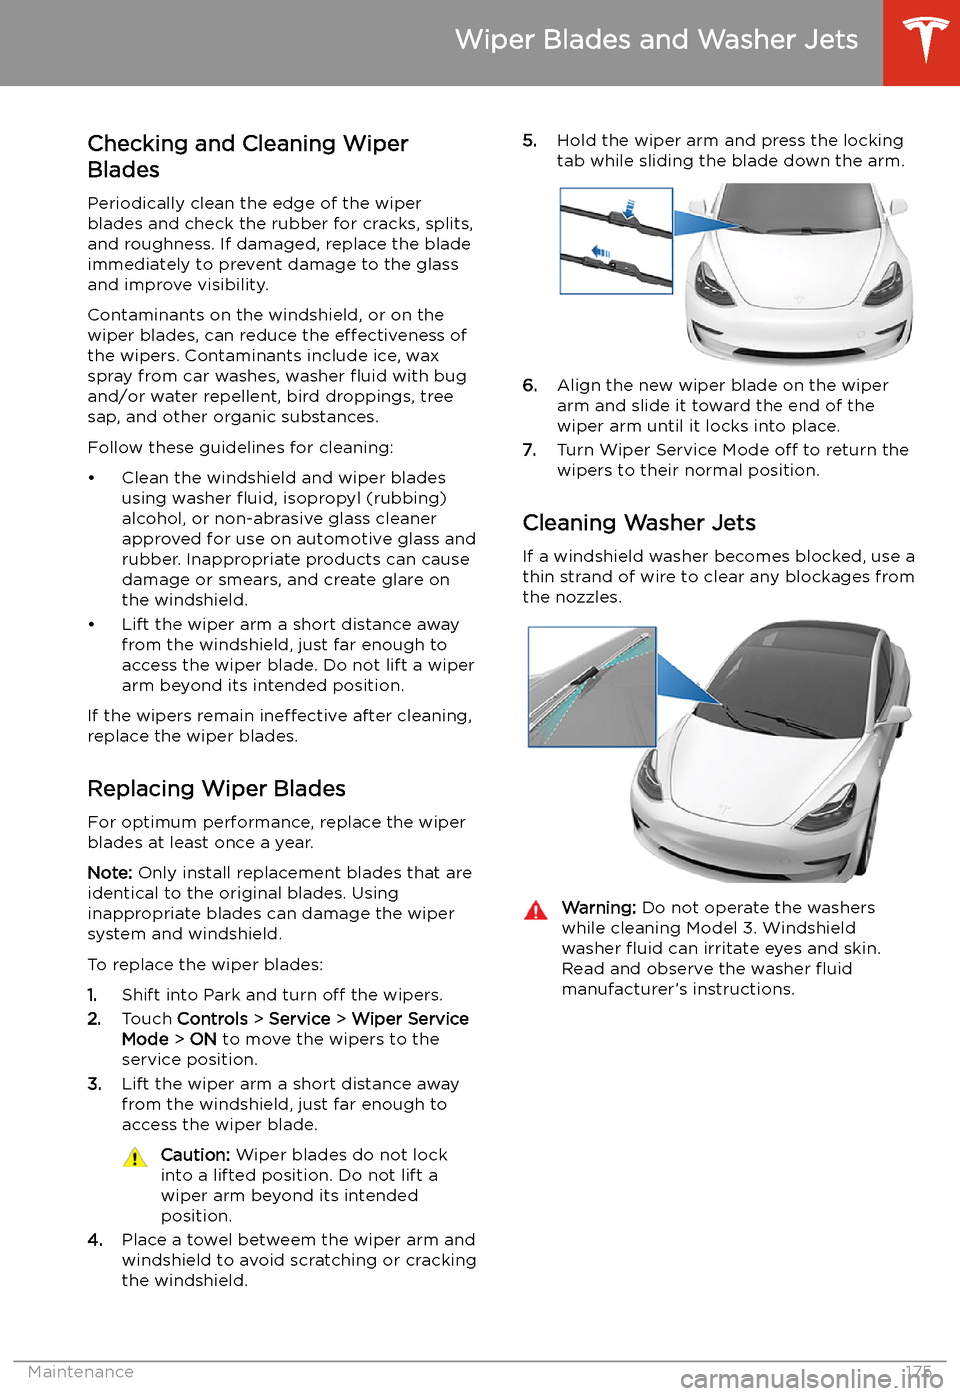 TESLA MODEL 3 2020  Owners Manuals Wiper Blades and Washer Jets
Checking and Cleaning Wiper
Blades
Periodically clean the edge of the wiper
blades and check the rubber for cracks, splits, and roughness. If damaged, replace the bladeimm